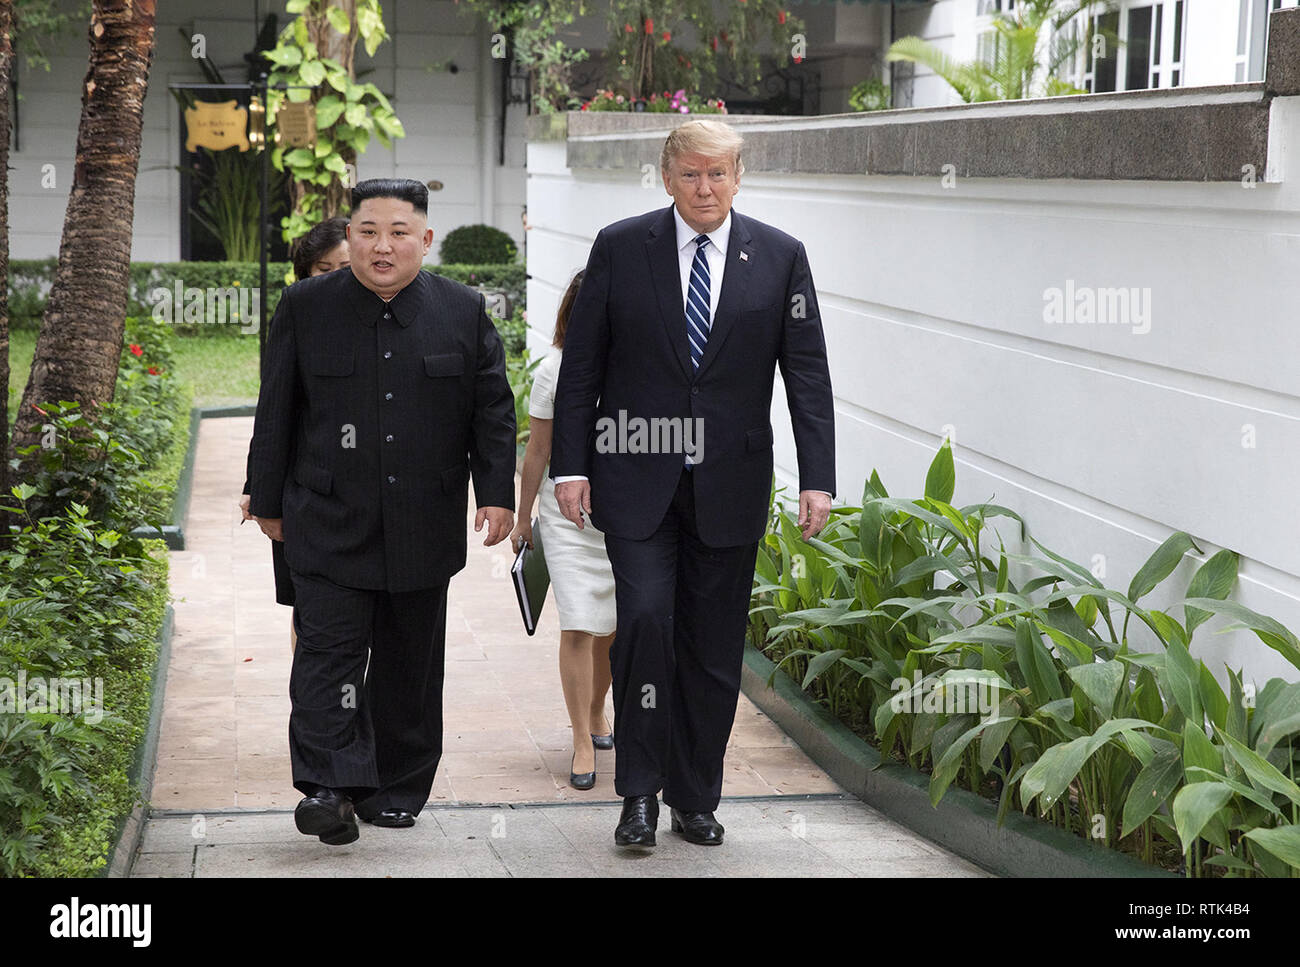 President Donald J. Trump and Kim Jong Un, Chairman of the State Affairs Commission of the Democratic PeopleÕs Republic of Korea, walk together on the pool patio Thursday, Feb. 28, 2019, at the Sofitel Legend Metropole hotel in Hanoi, prior to participating in an expanded bilateral meeting.   People:  President Donald Trump, Kim Jong Un Stock Photo